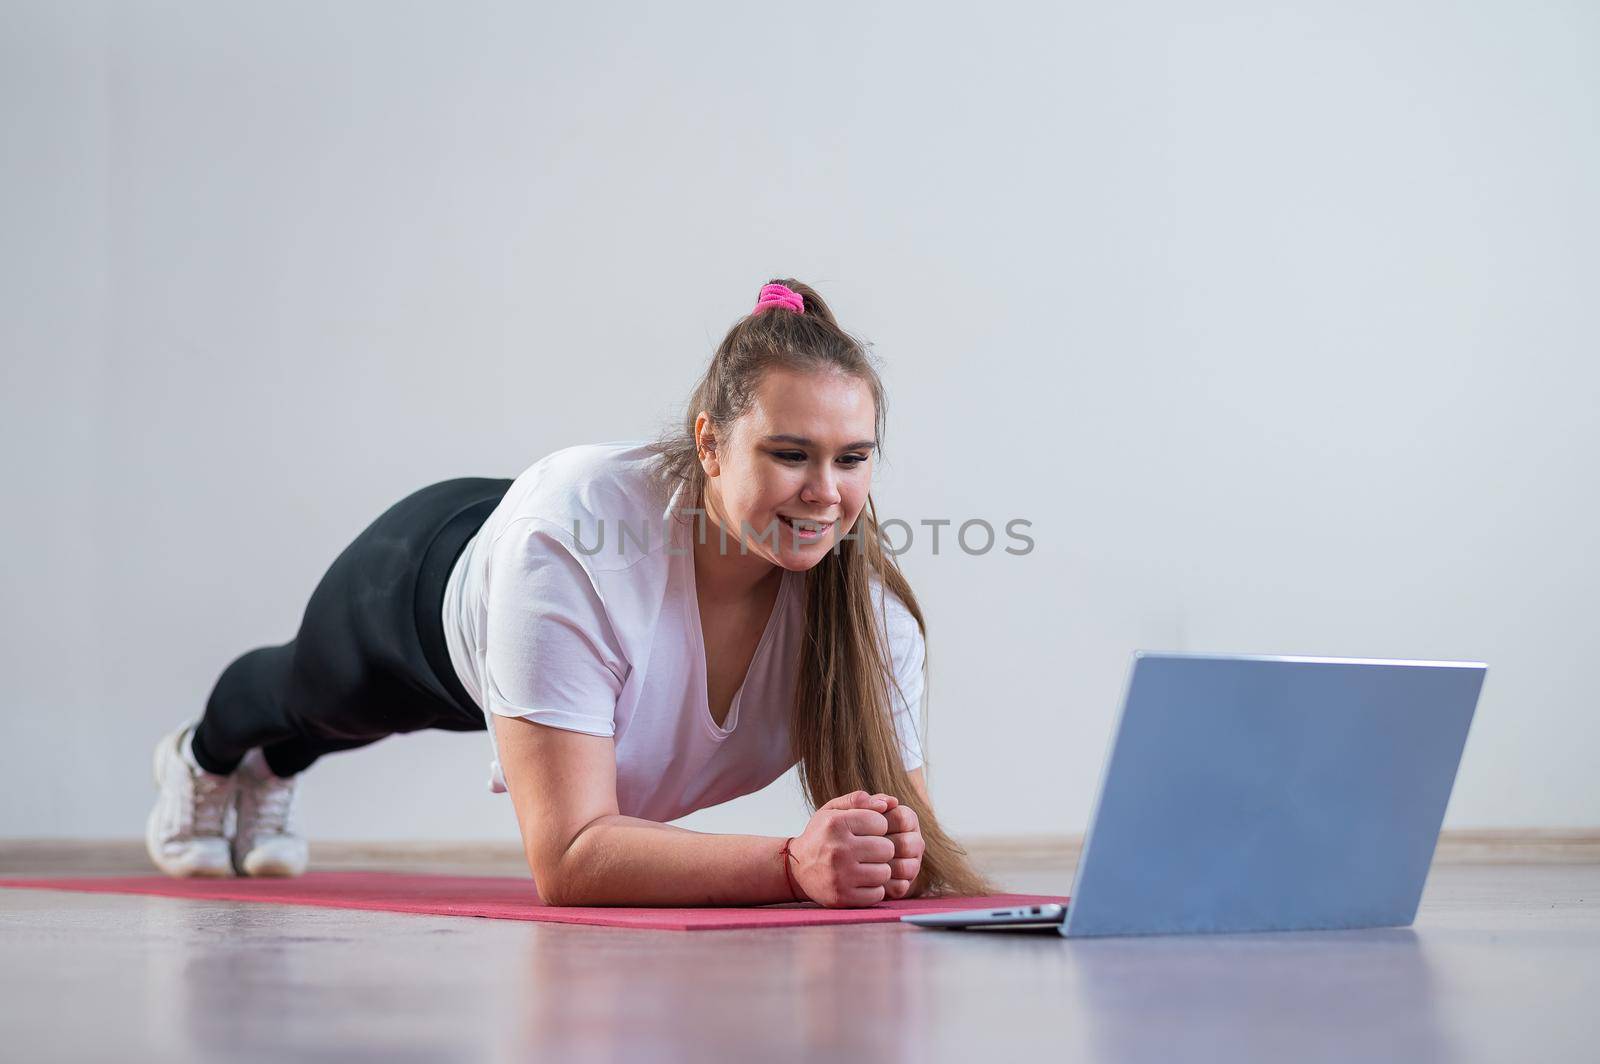 Young fat caucasian woman doing a plank on a sports mat. A cute plus size girl in sportswear is doing fitness exercises and watching an online tutorial on a laptop.